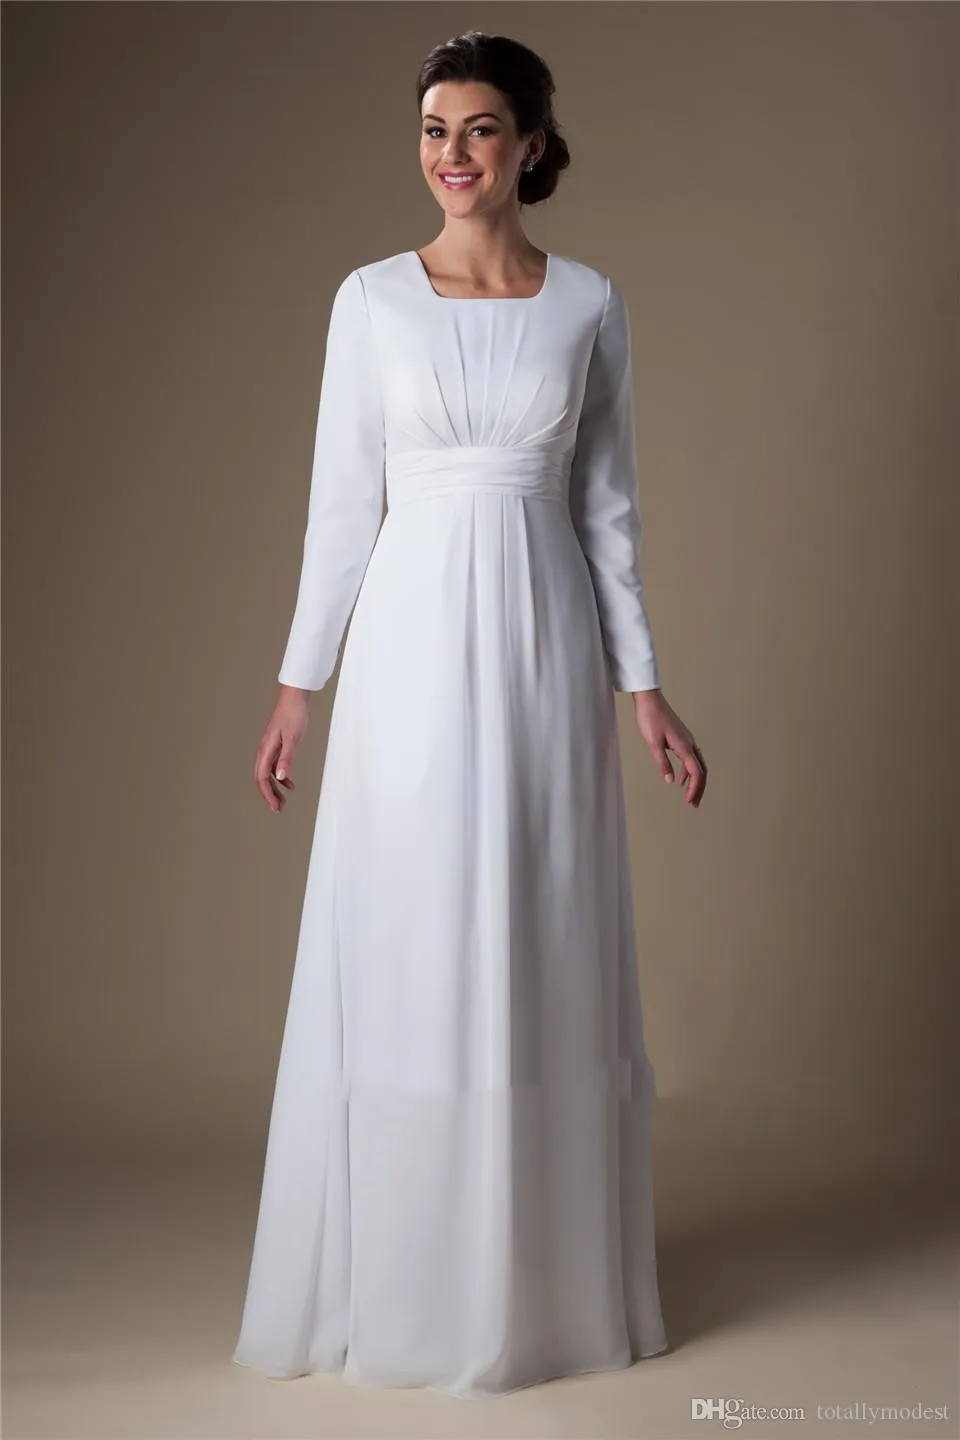 Simple White Chiffon Temple Long Sleeves Wedding Dresses Sleeves A Line ...